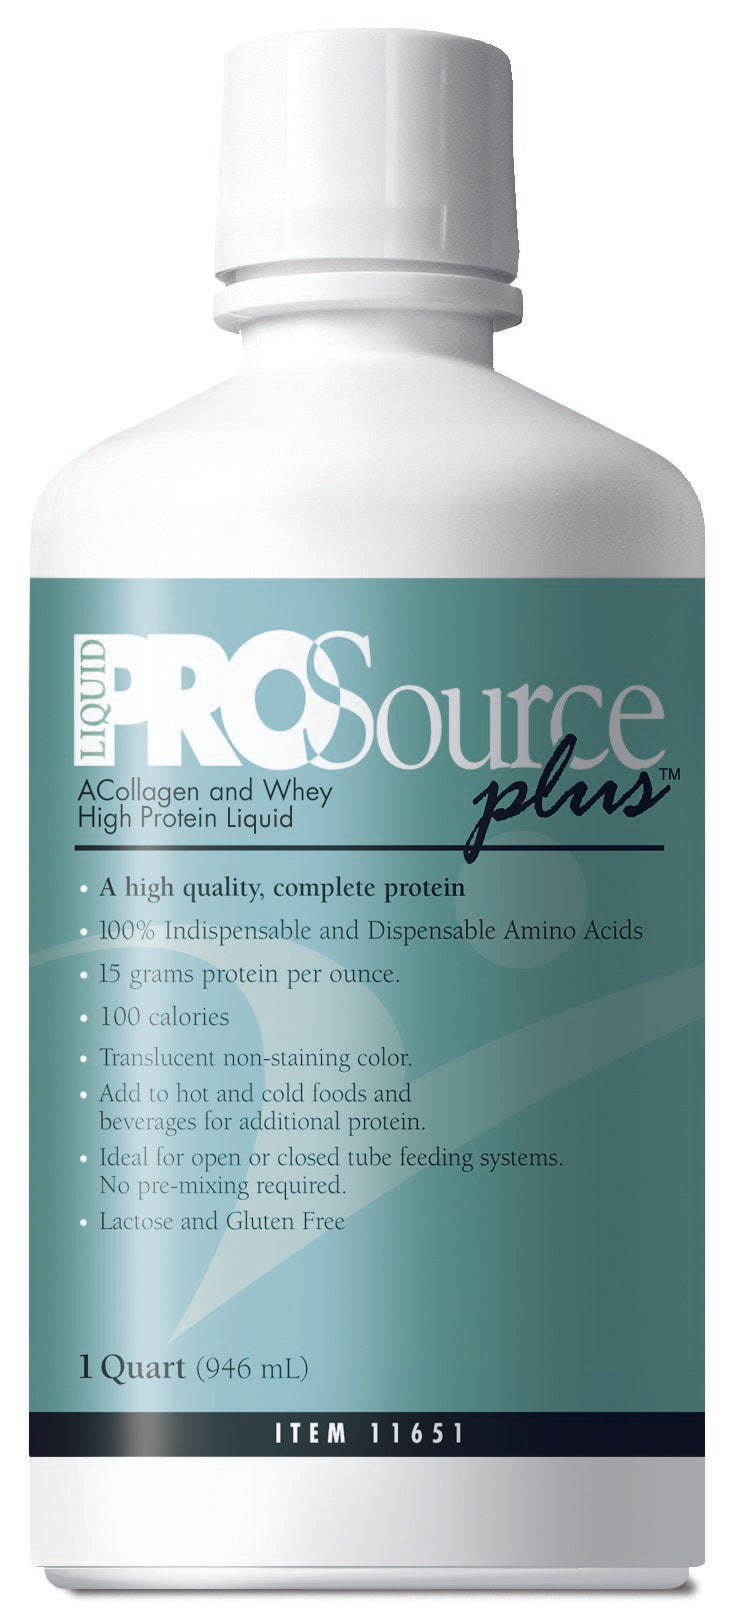  Protein Supplement ProSource Plus™ Unflavored 32 oz. Bottle Concentrate 